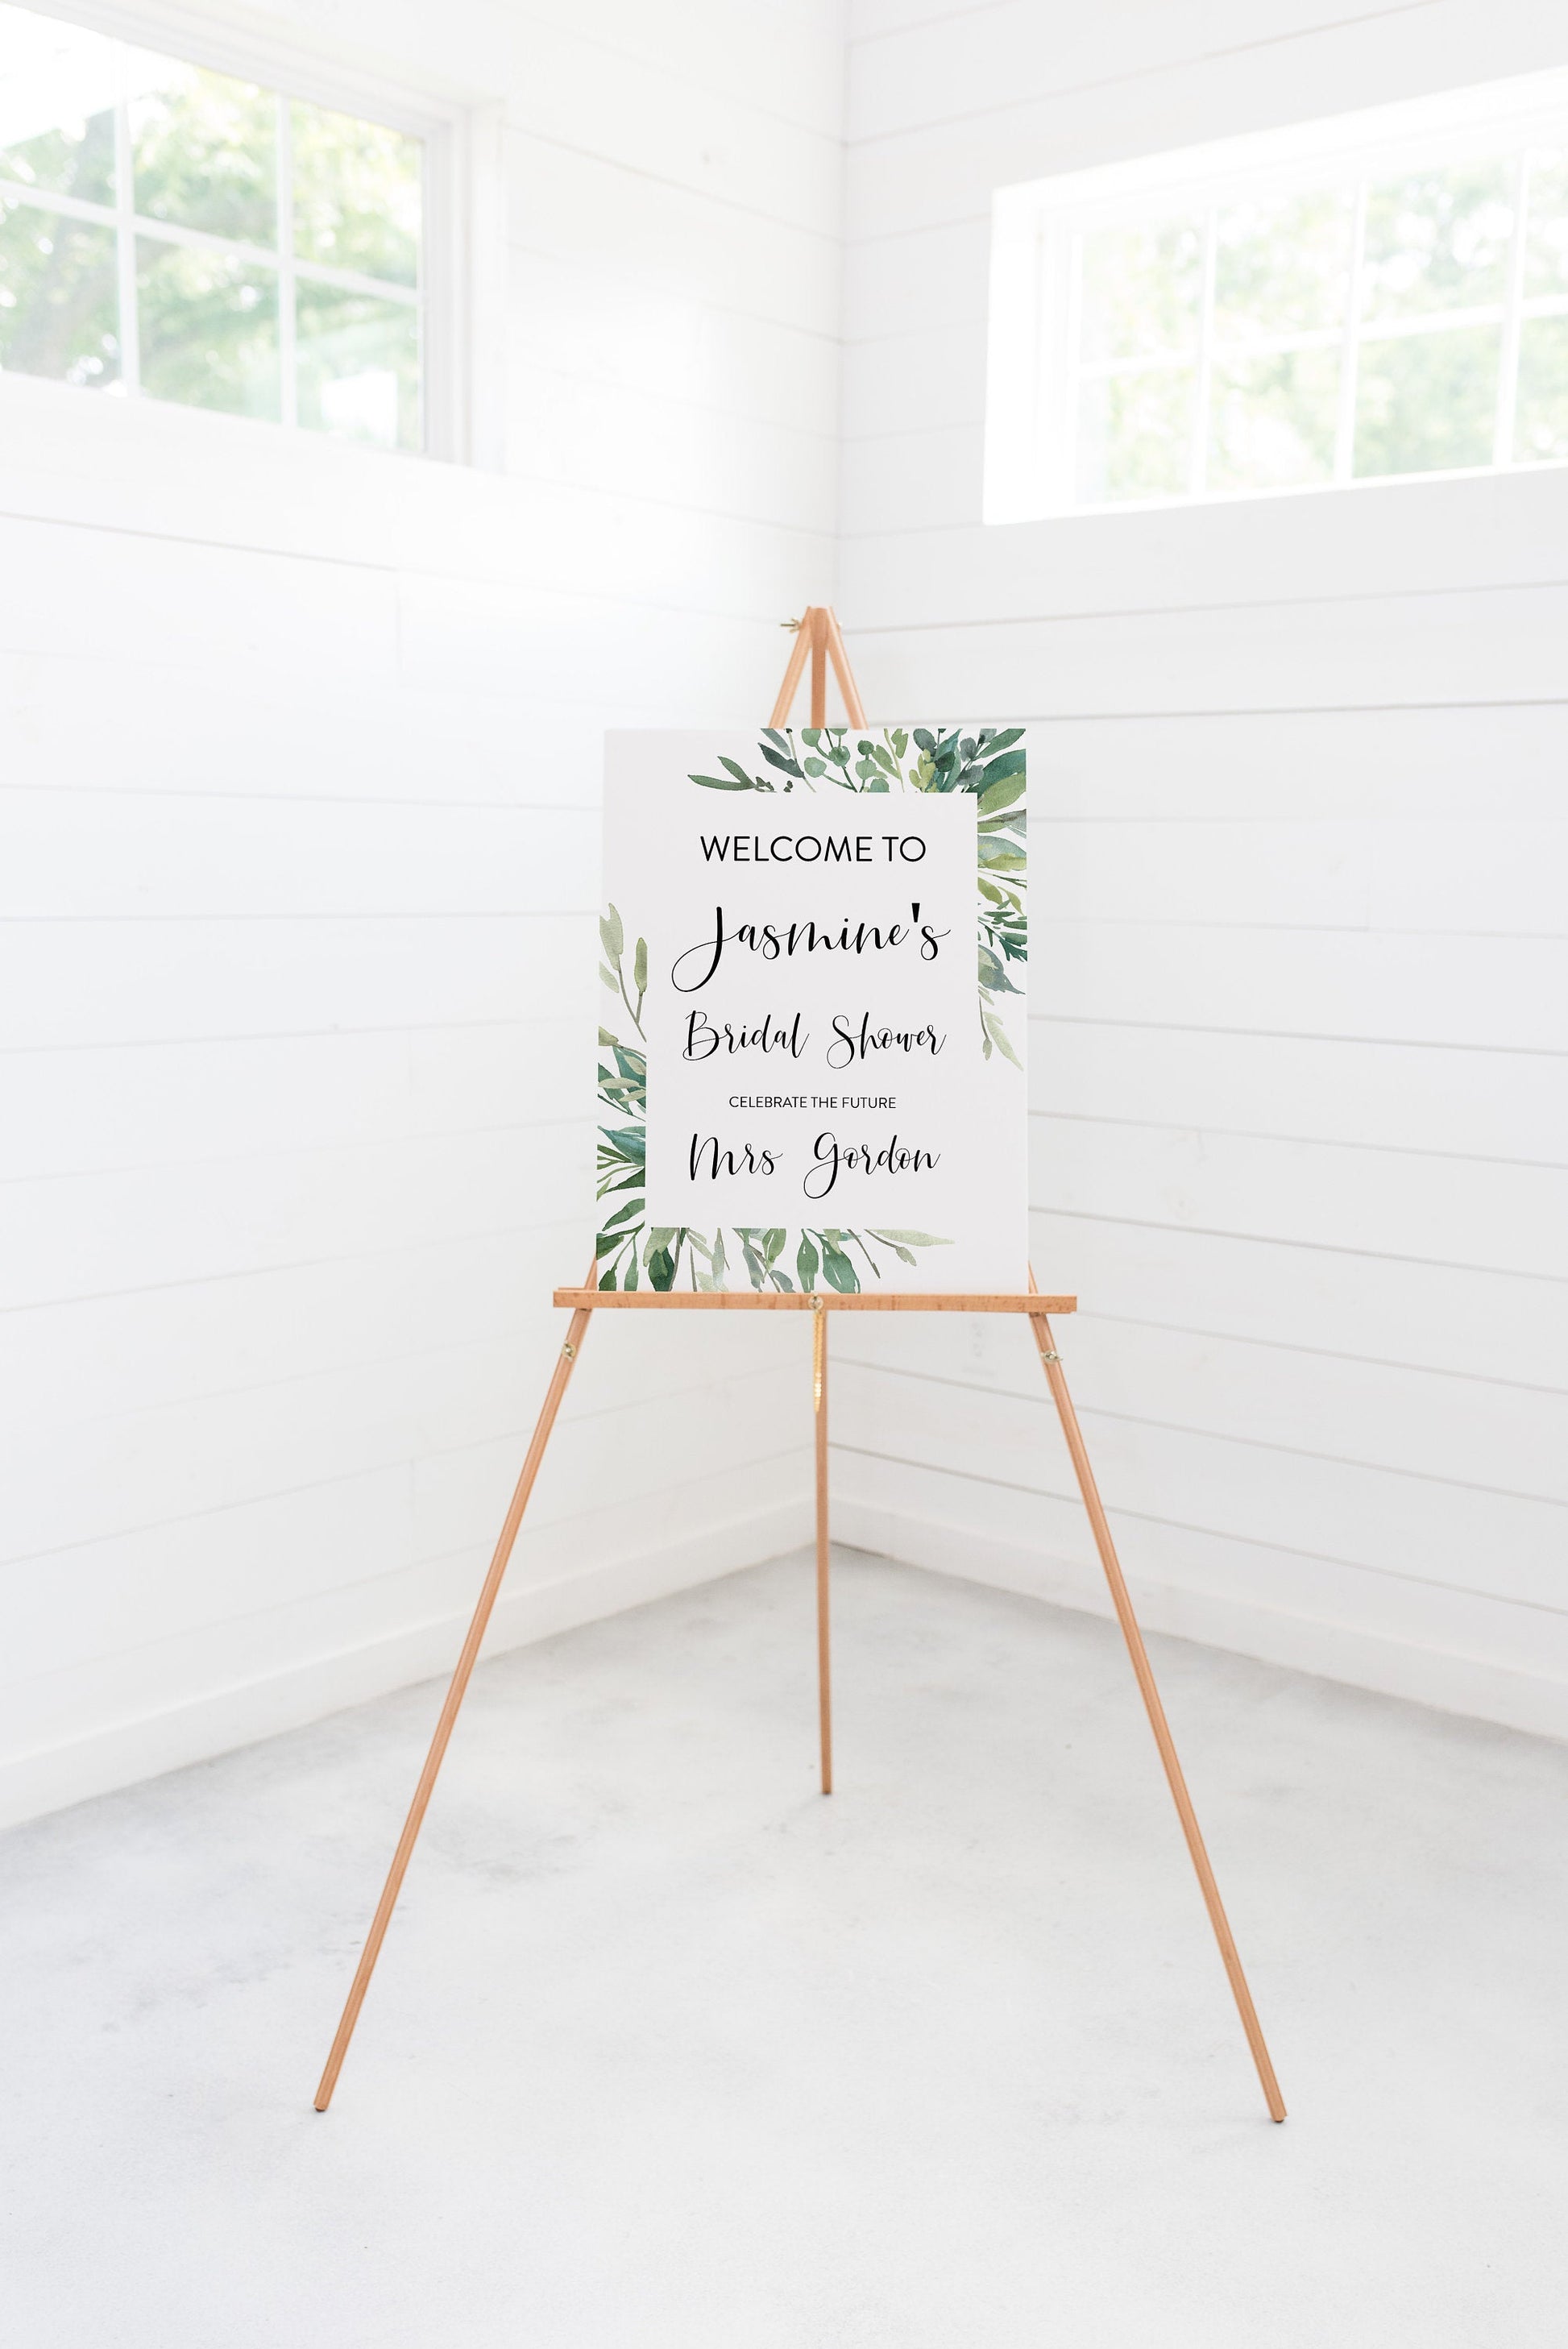 Printable Bridal Shower Welcome Sign Template Editable Instant Download Wedding Décor Greenery - Jasmine SHOWER/BACH SIGNS SAVVY PAPER CO